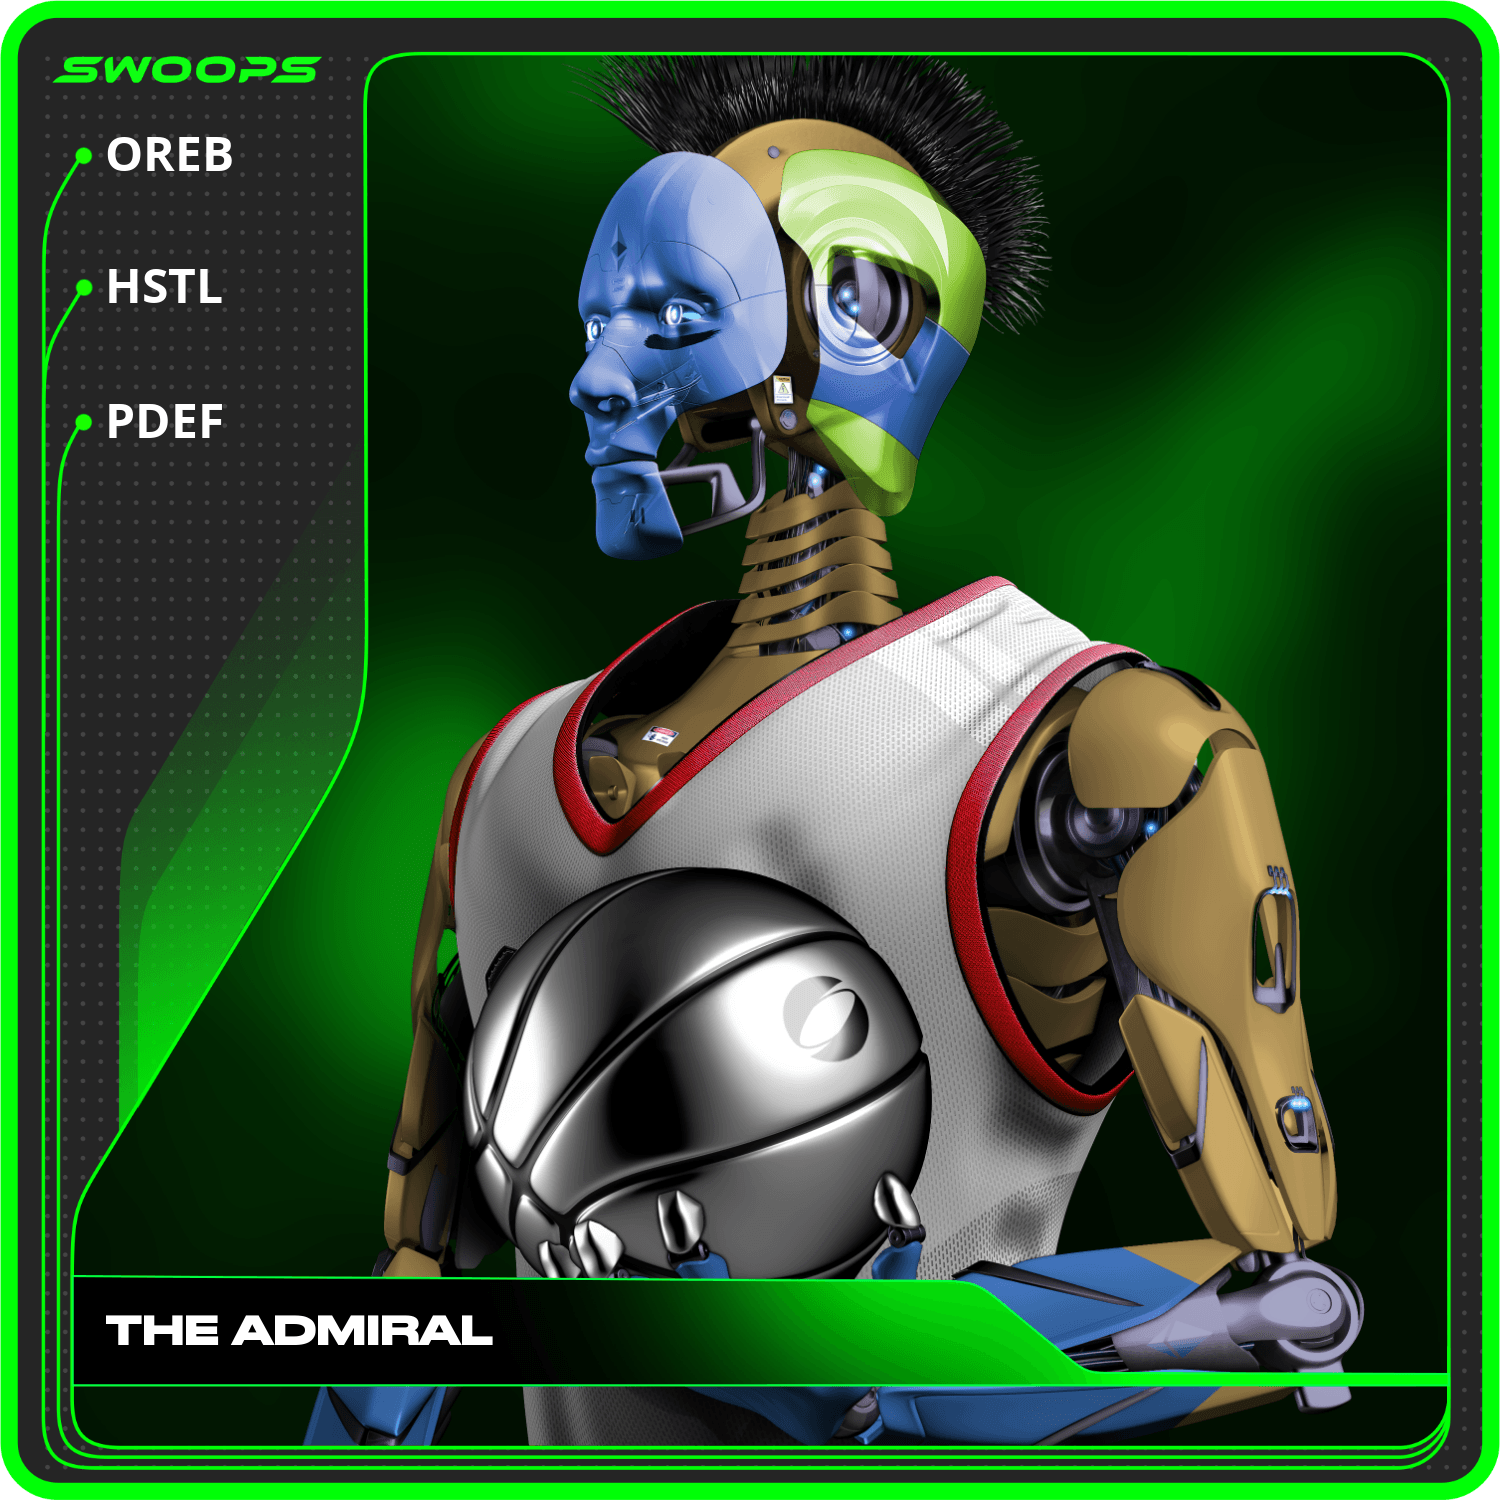 THE ADMIRAL